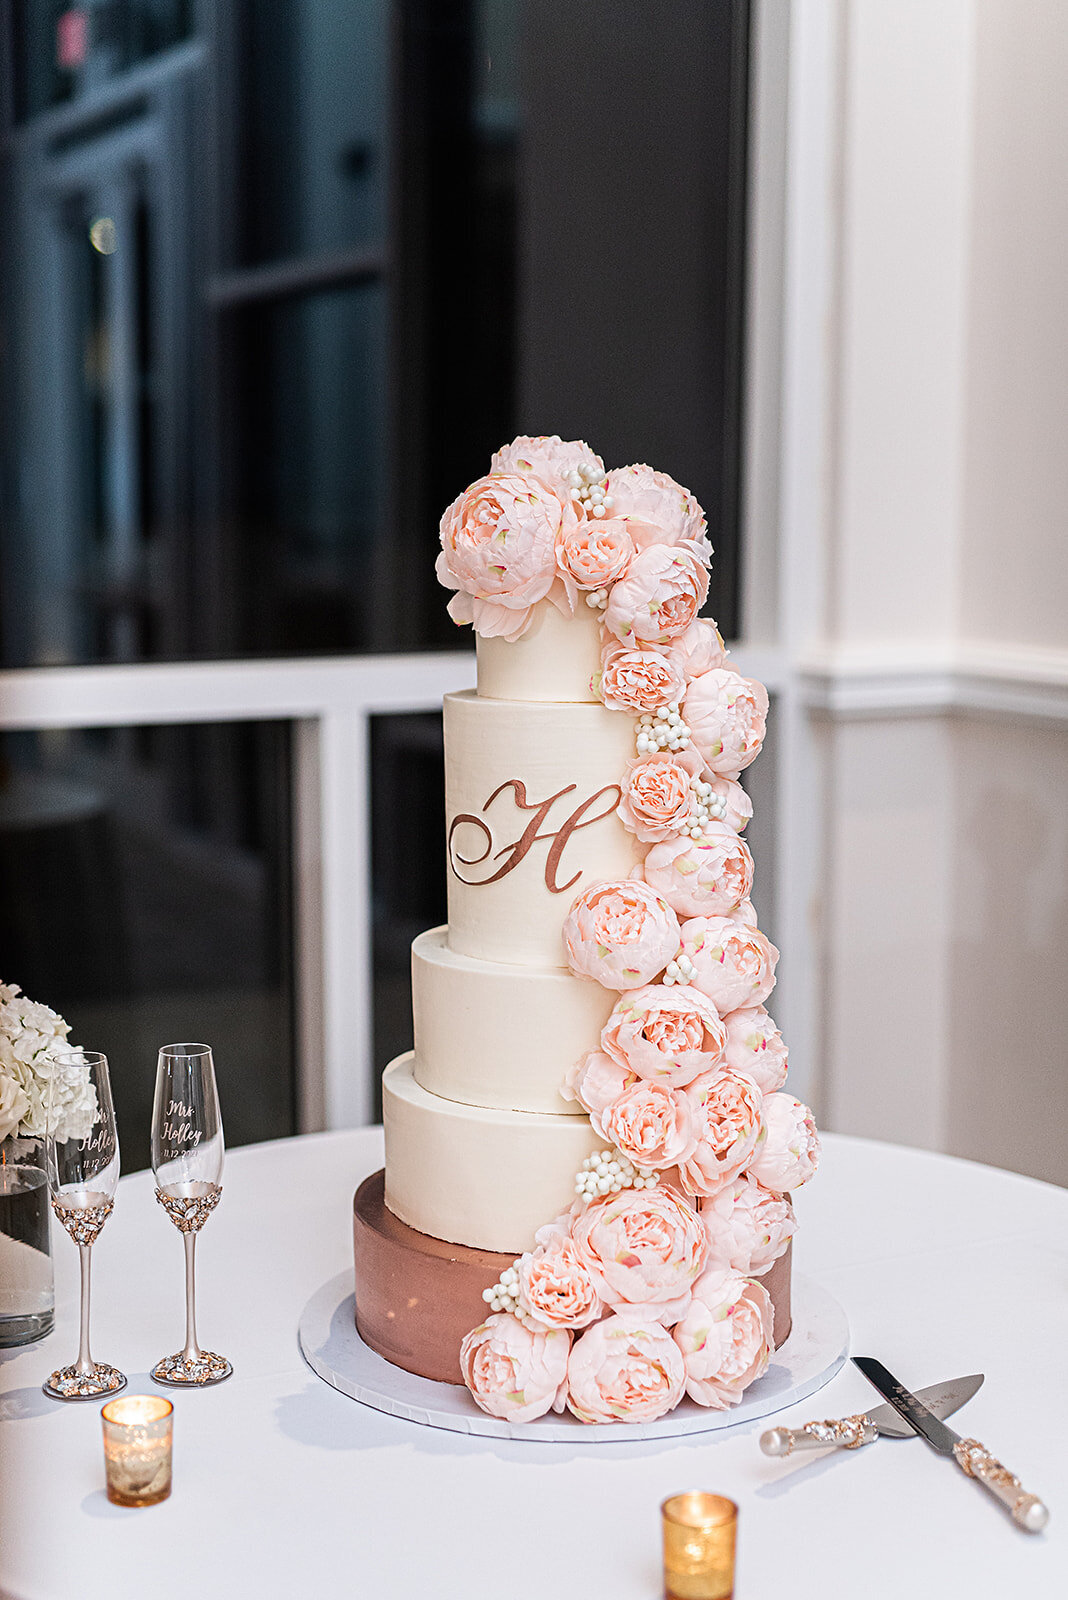 courtney_and_ajalen_wedding_at_the_bowden_wedding_cake